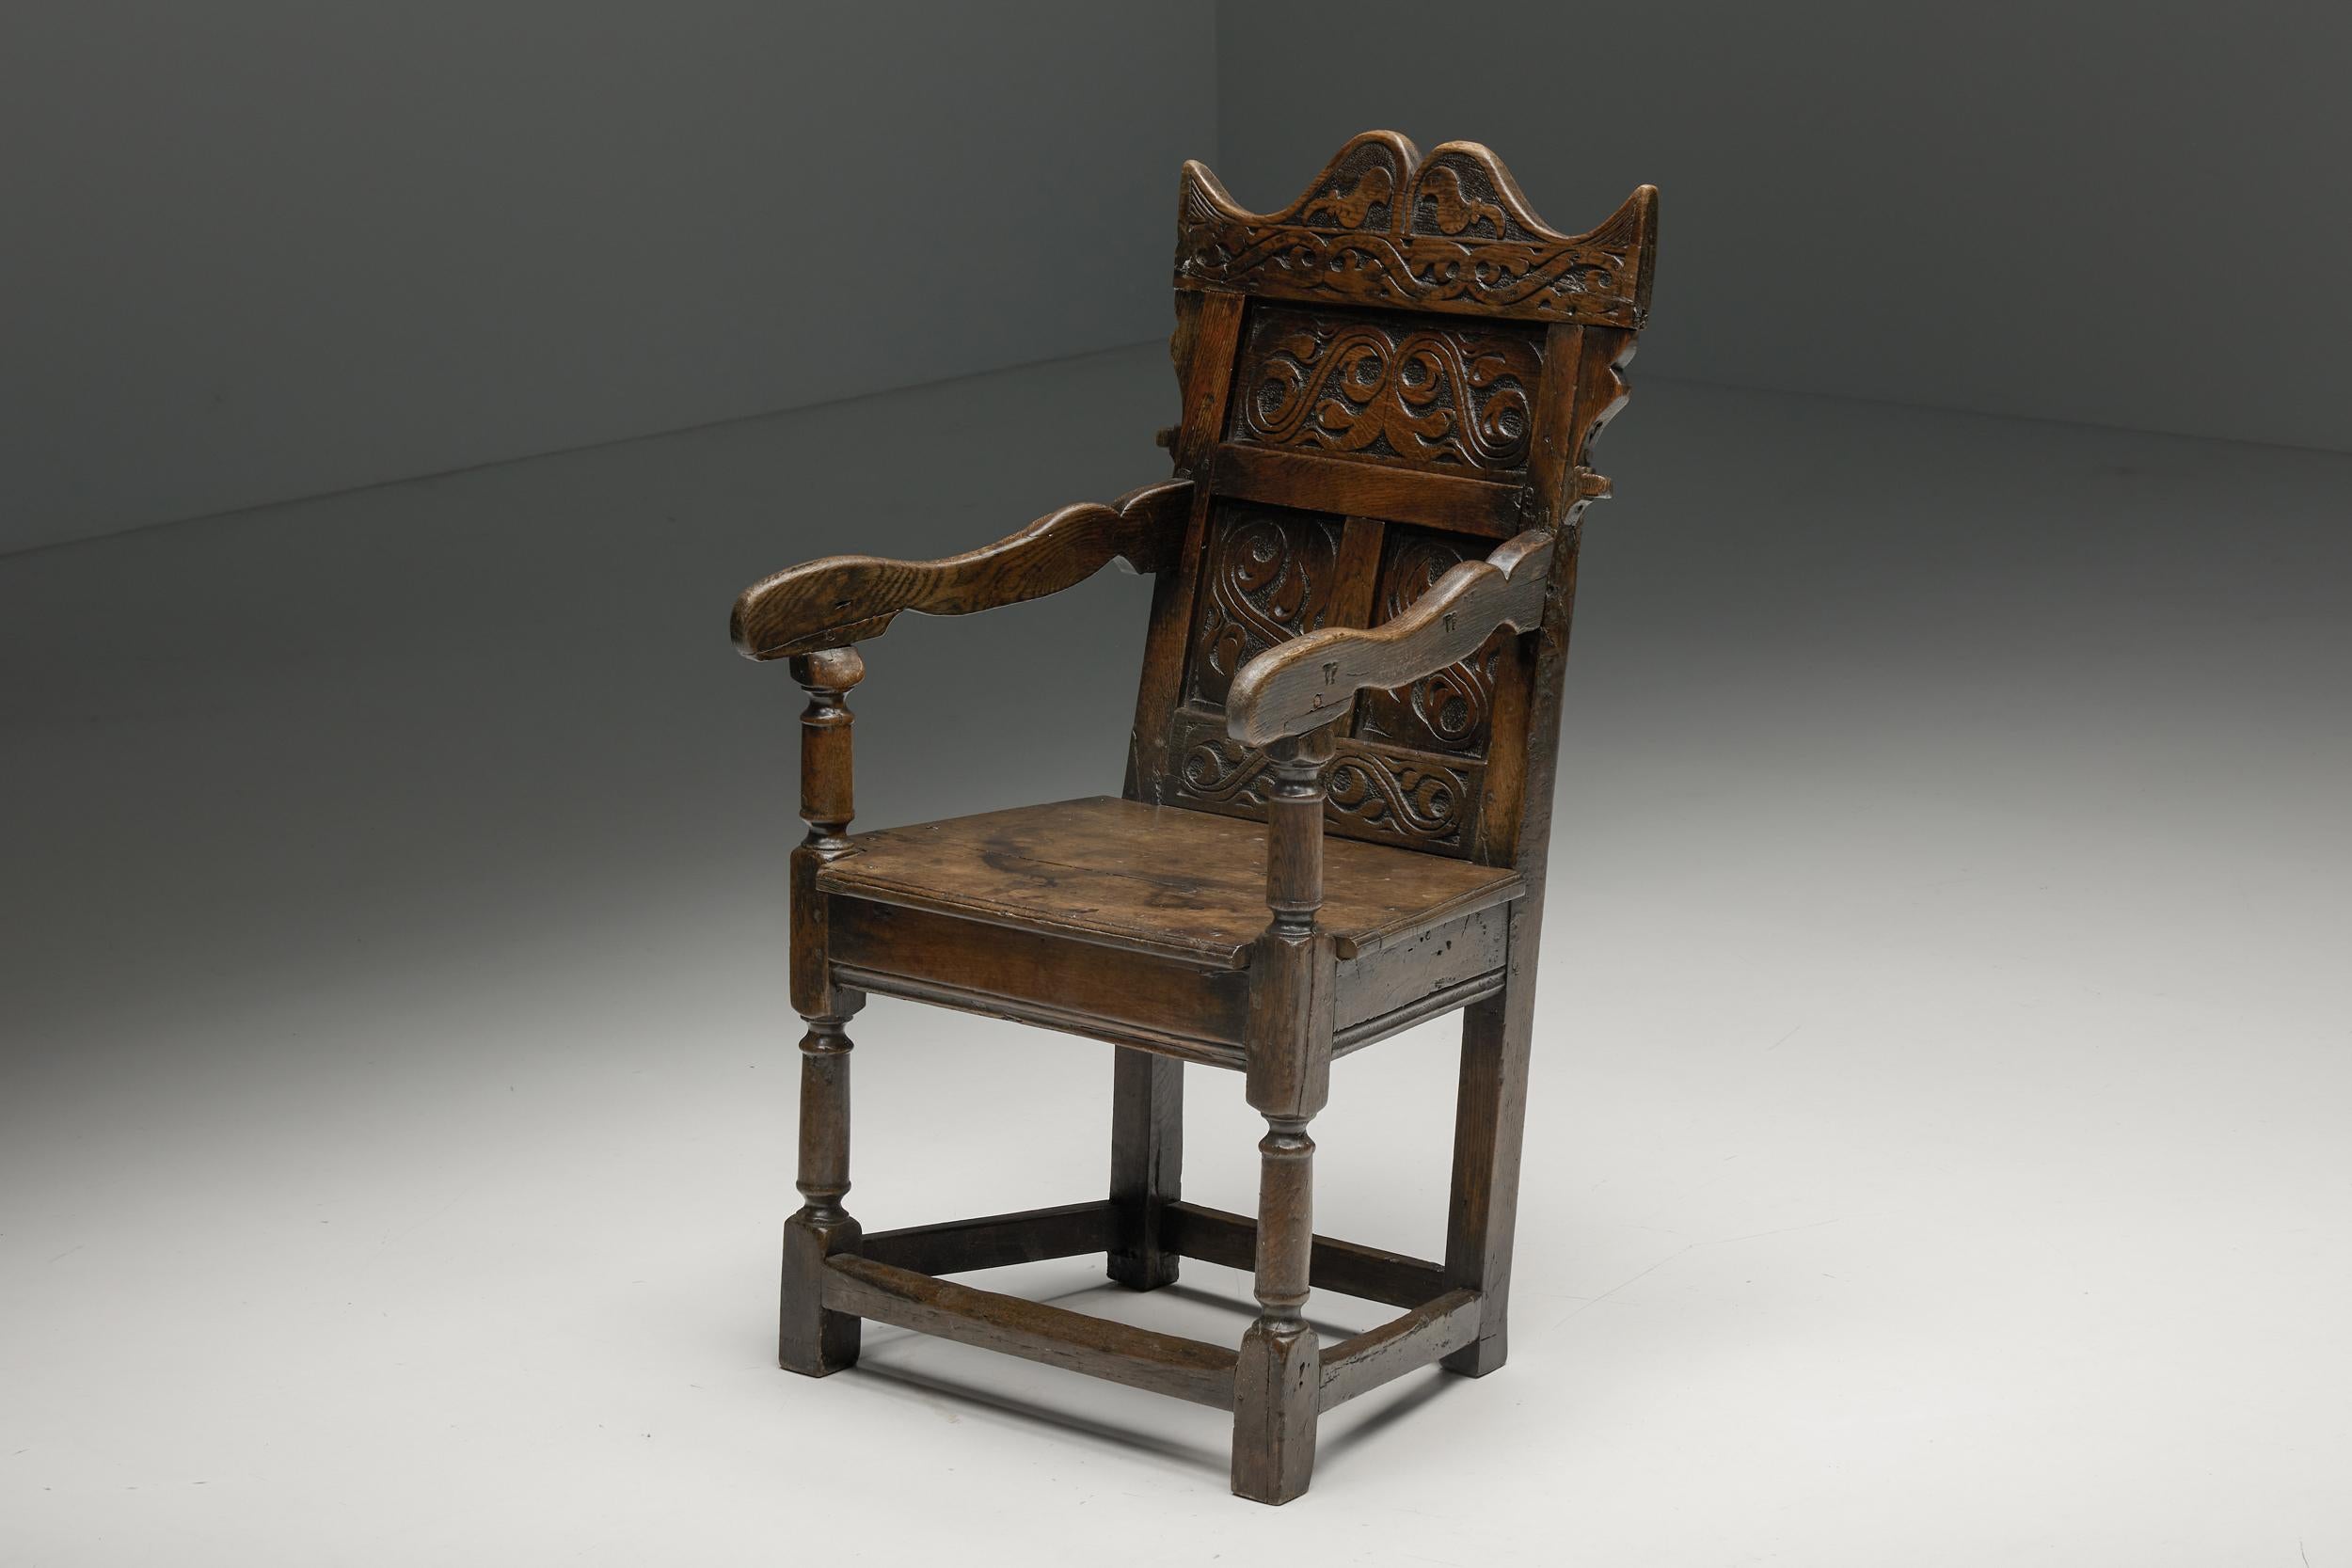 17th-century carved armchair crafted from solid oak, with curved armrests and subtly tilted back. The chair boasts a captivating patina and displays a character befitting its age and history, all while maintaining an excellent condition. Its